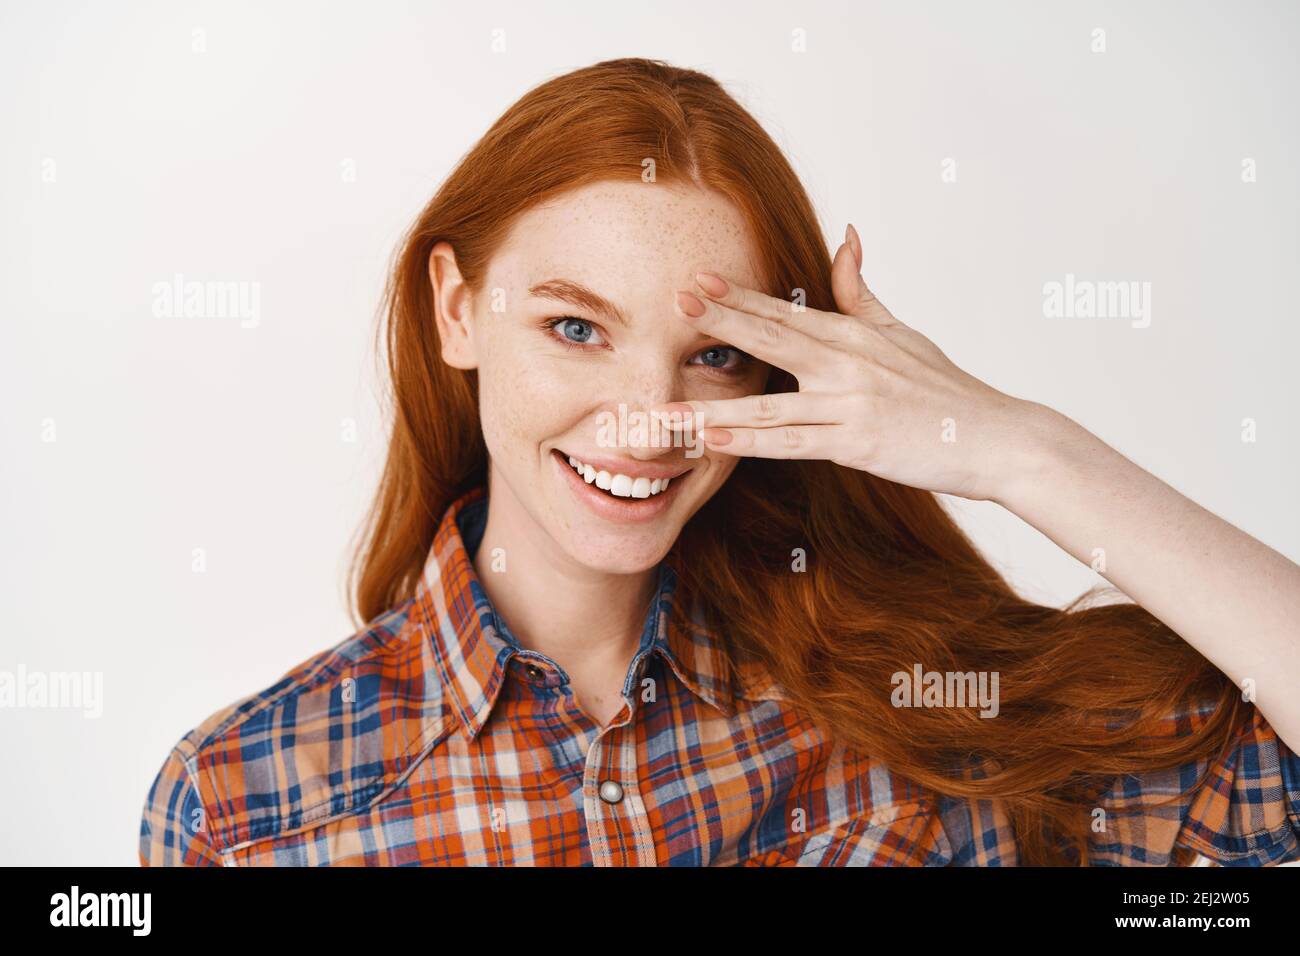 Close-up of beautiful redhead lady with blue eyes and pale skin, smiling at camera, standing over white background Stock Photo